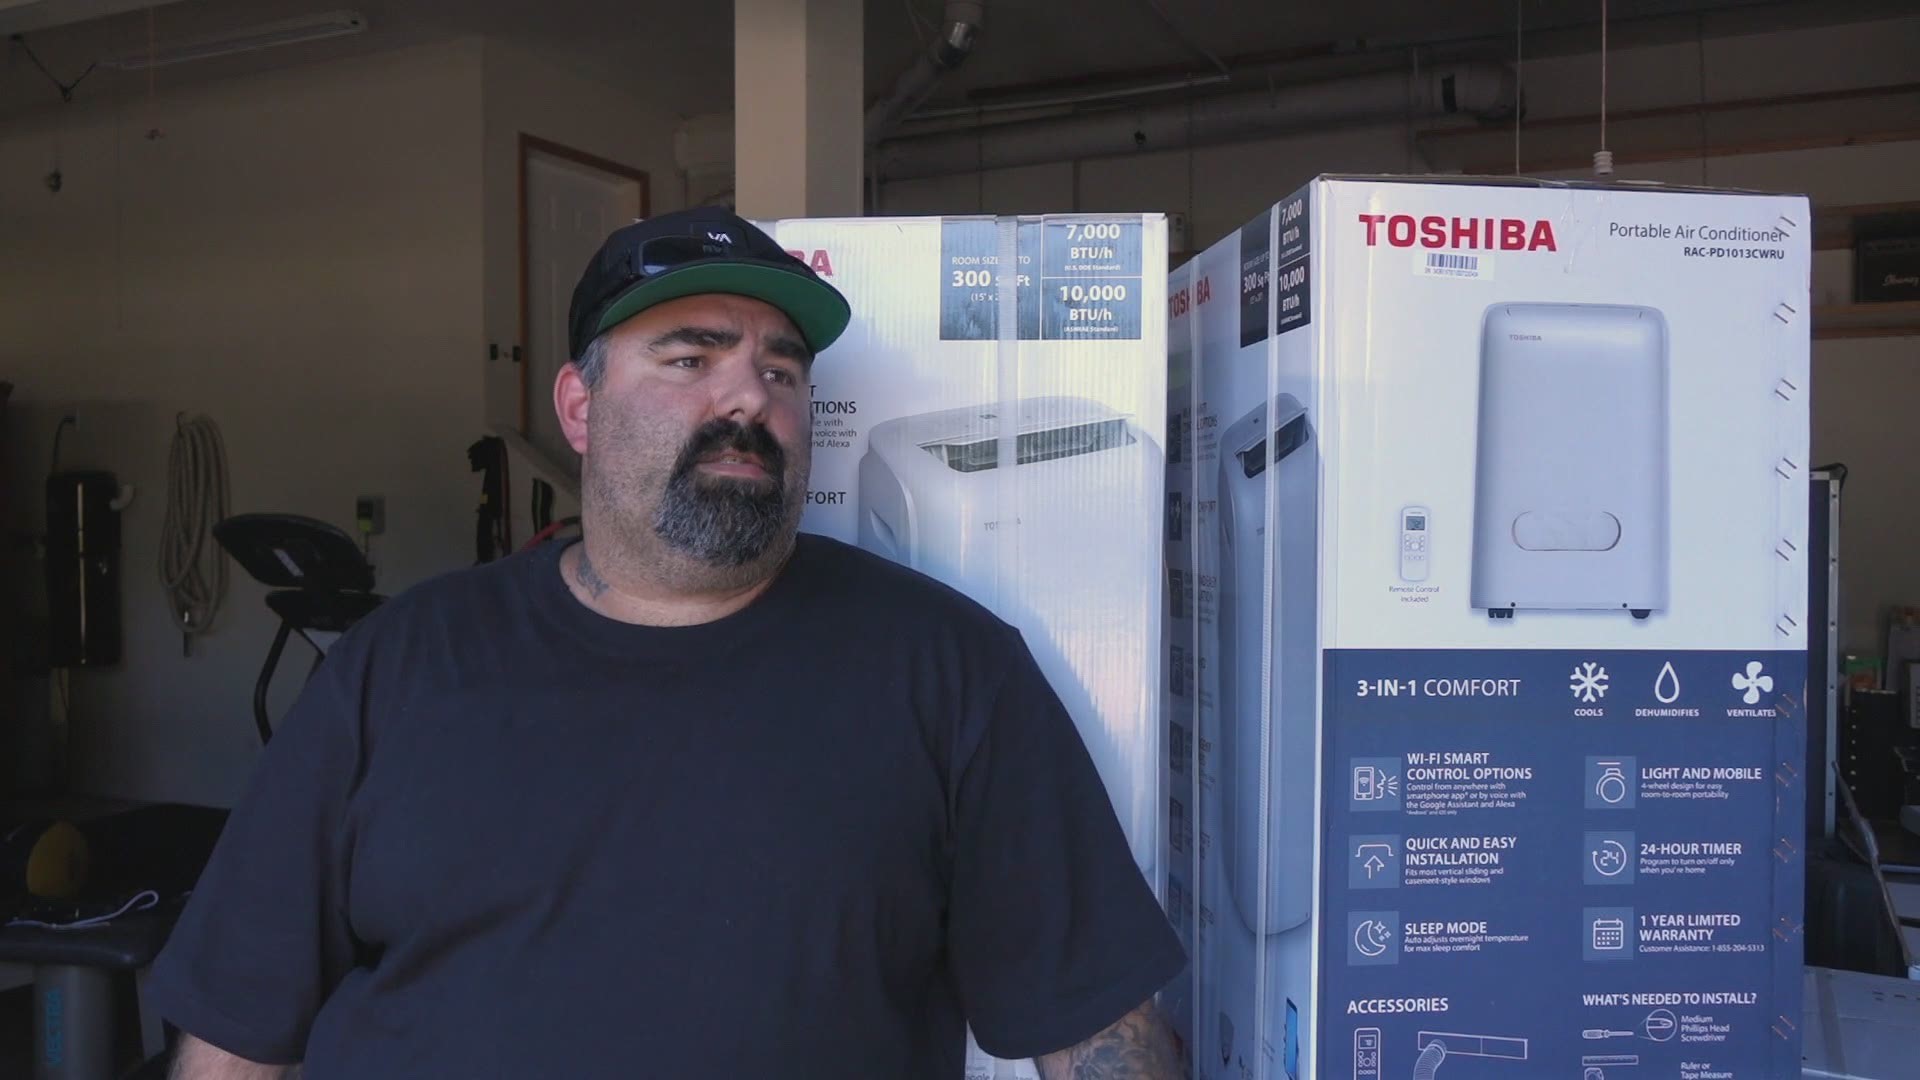 Where there's a will, there's a way. A Bonney Lake man drove through the night to Redding, California, to bring back A/C units for his neighbors in need.